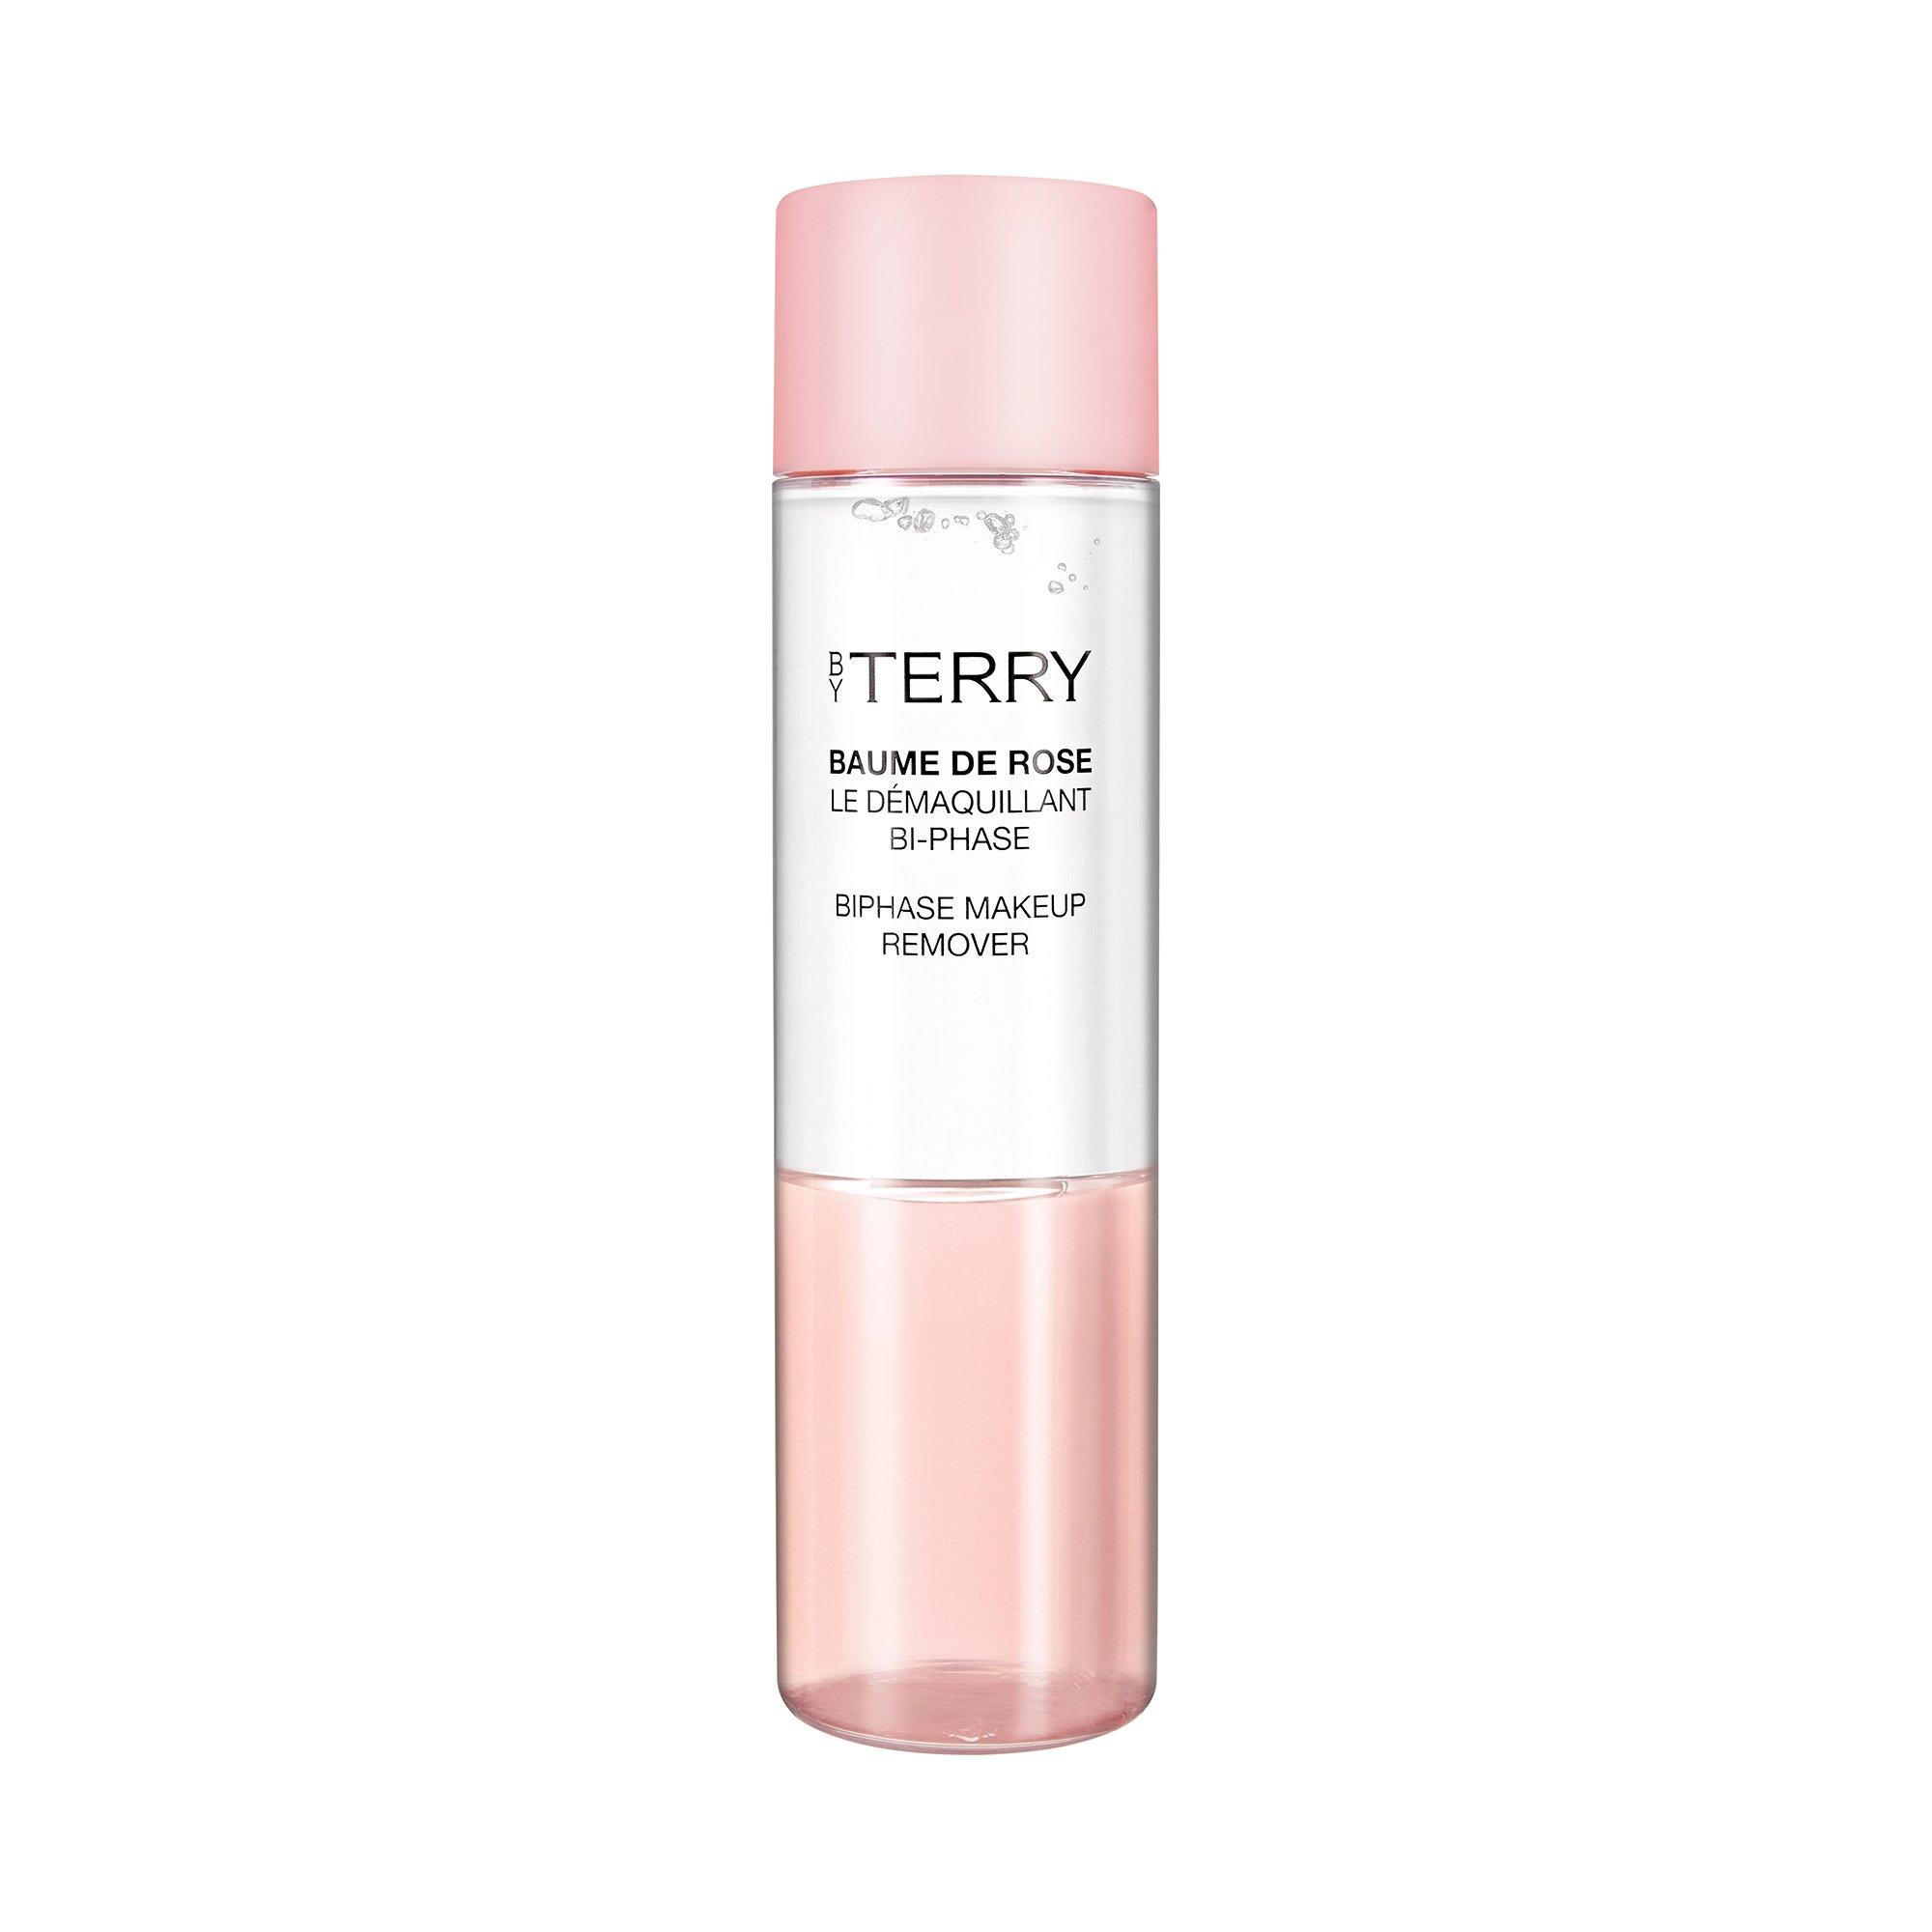 Image of BY TERRY Baume de Rose Bi-Phase Make Up Remover